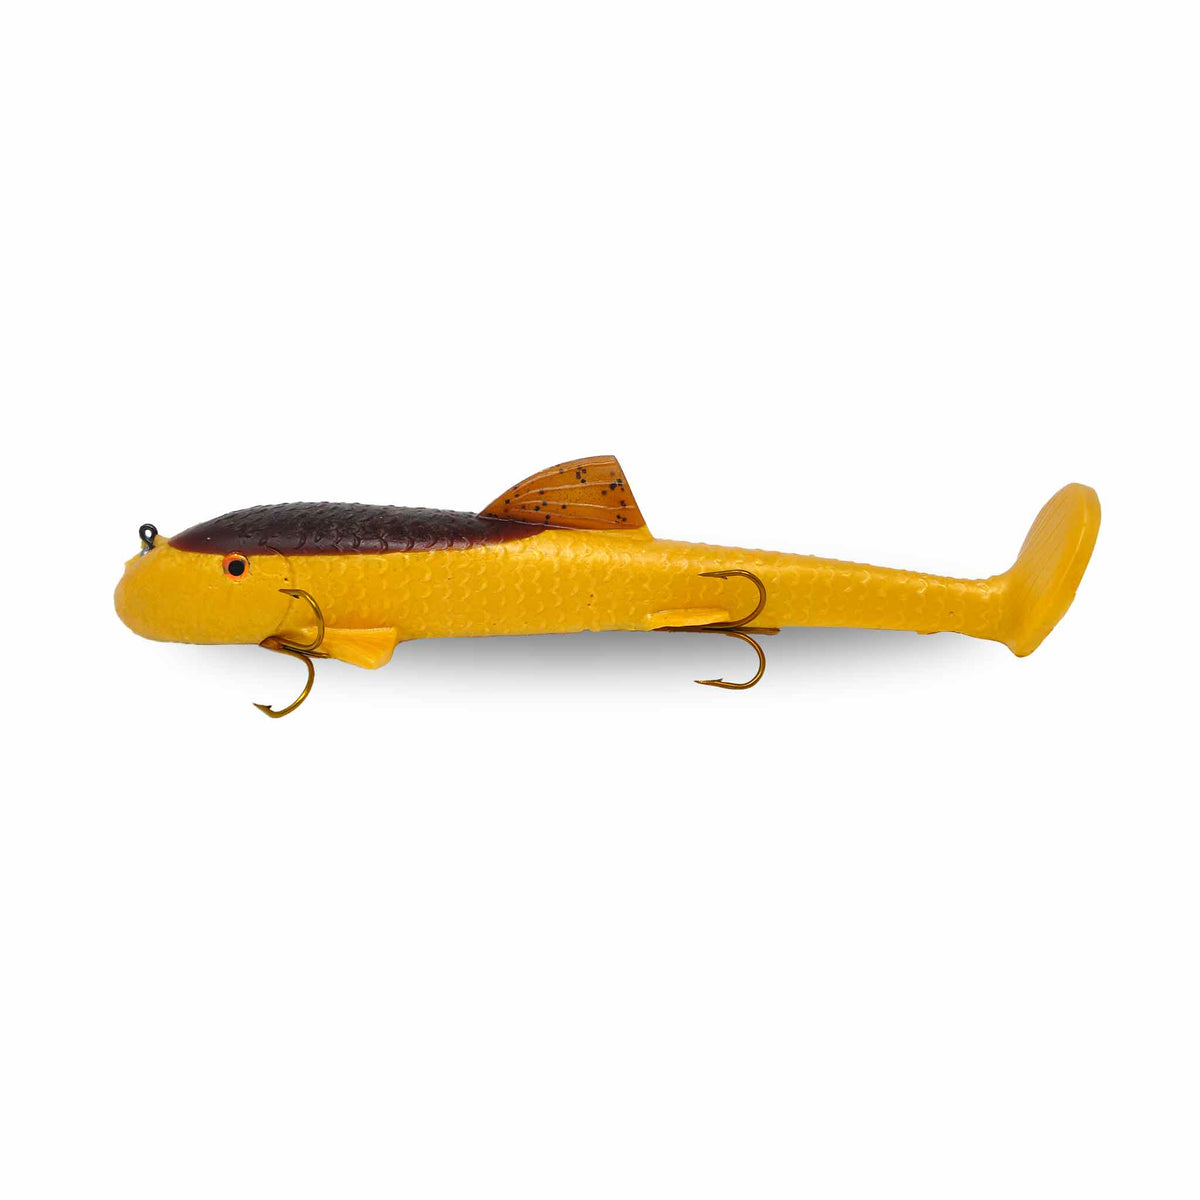 View of Rubber Suick Suzy Sucker 13" Swimbait Dirty Walleye available at EZOKO Pike and Musky Shop